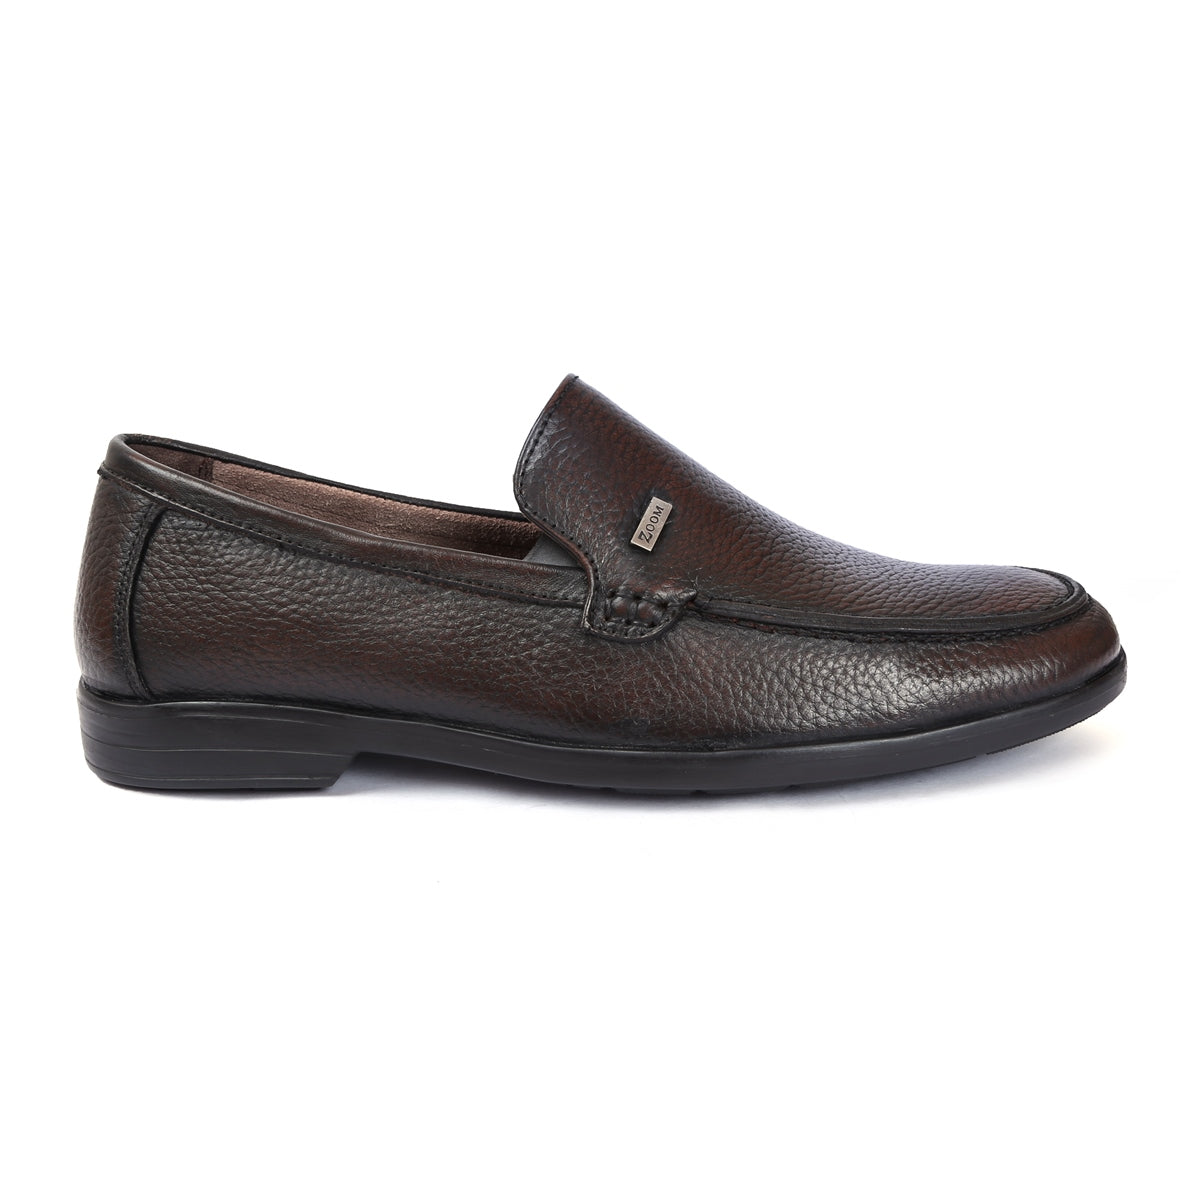 Zoom Shoes™ Leather Loafers for Men SL-11